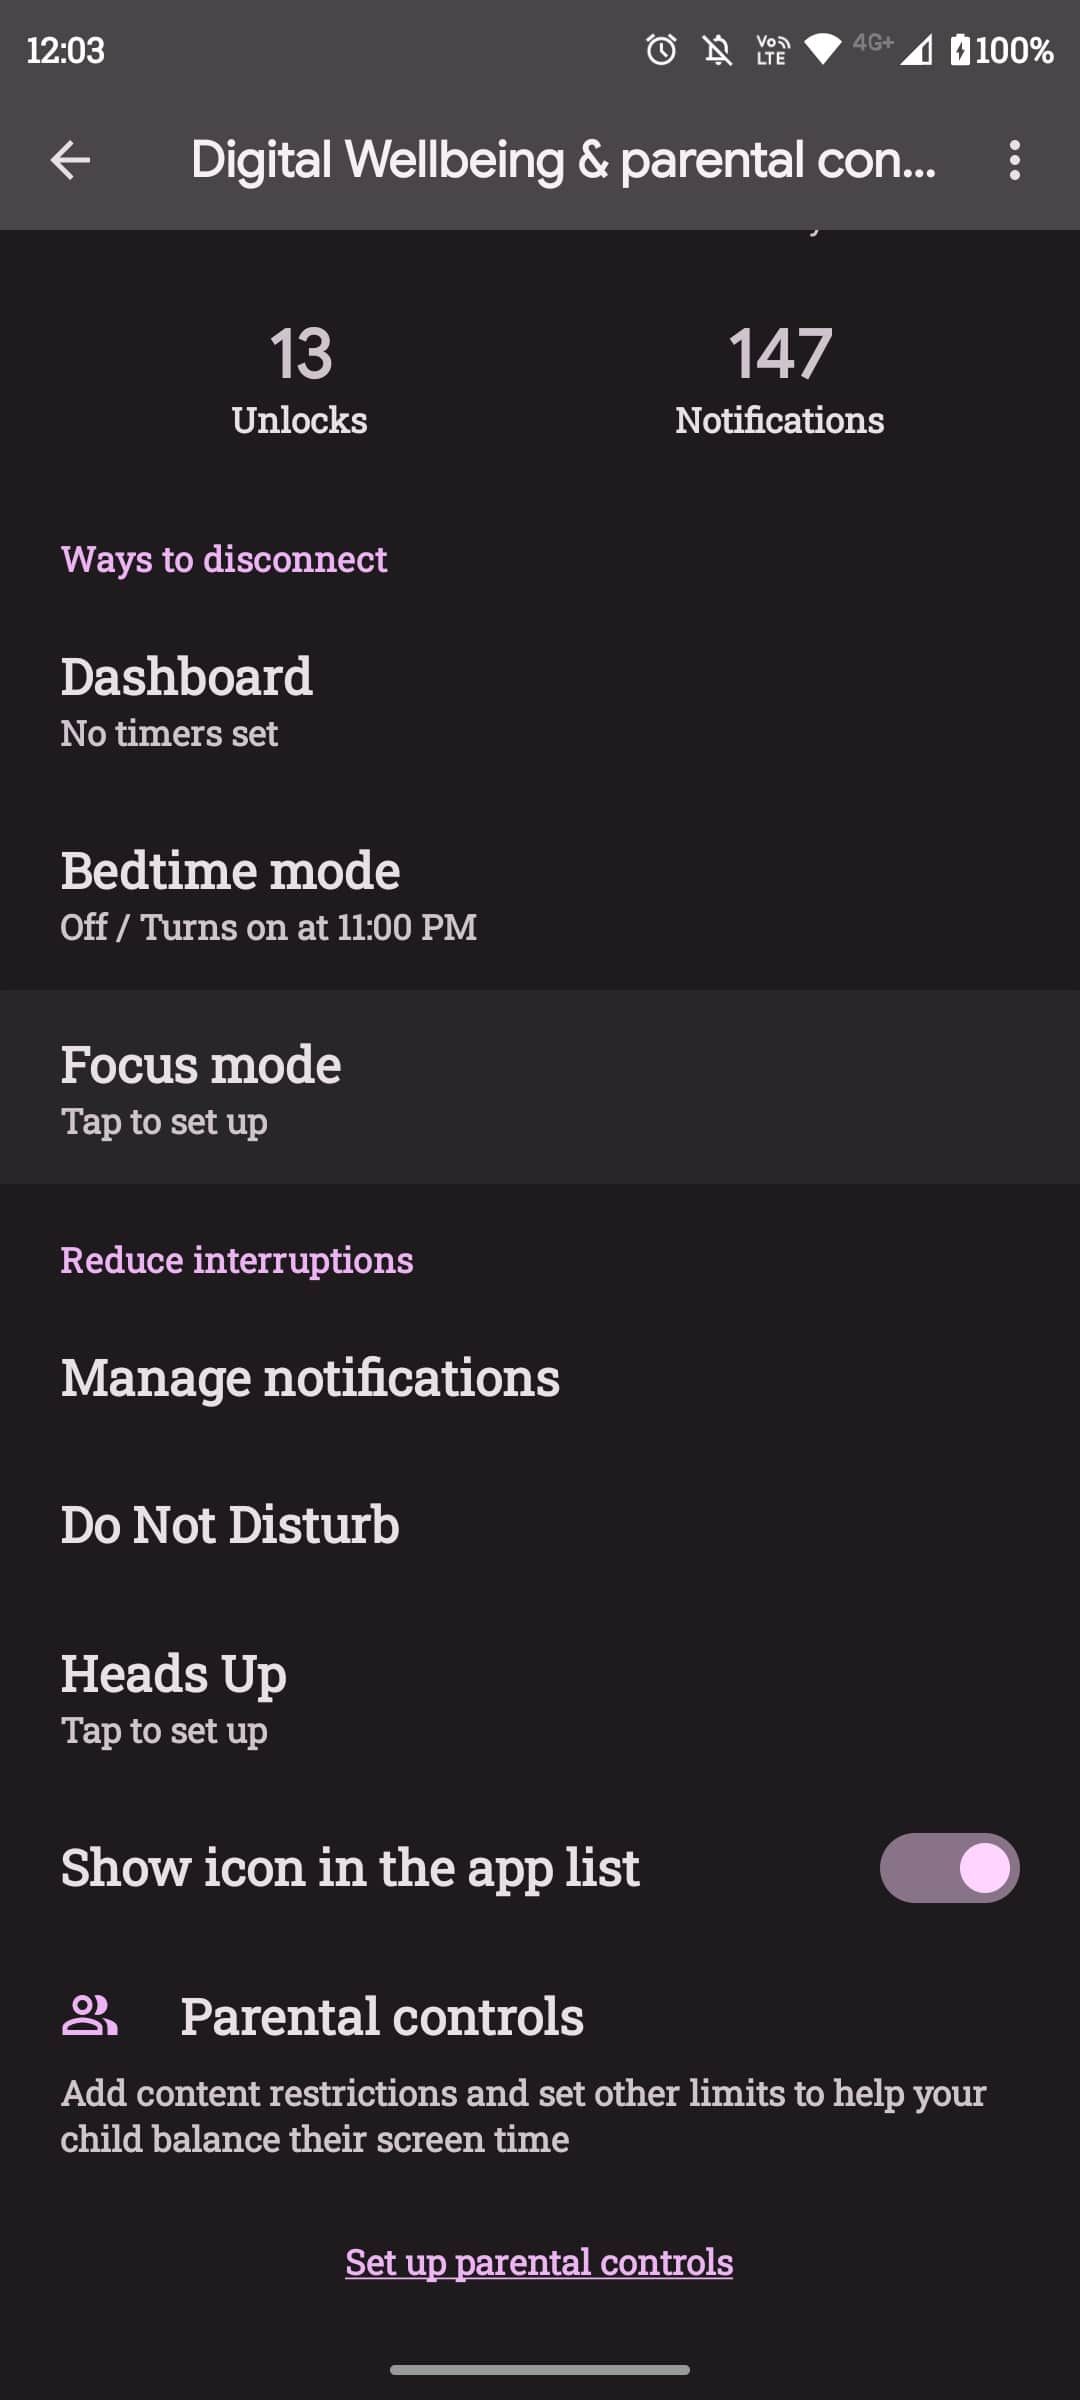 Digital Wellbeing app settings and options